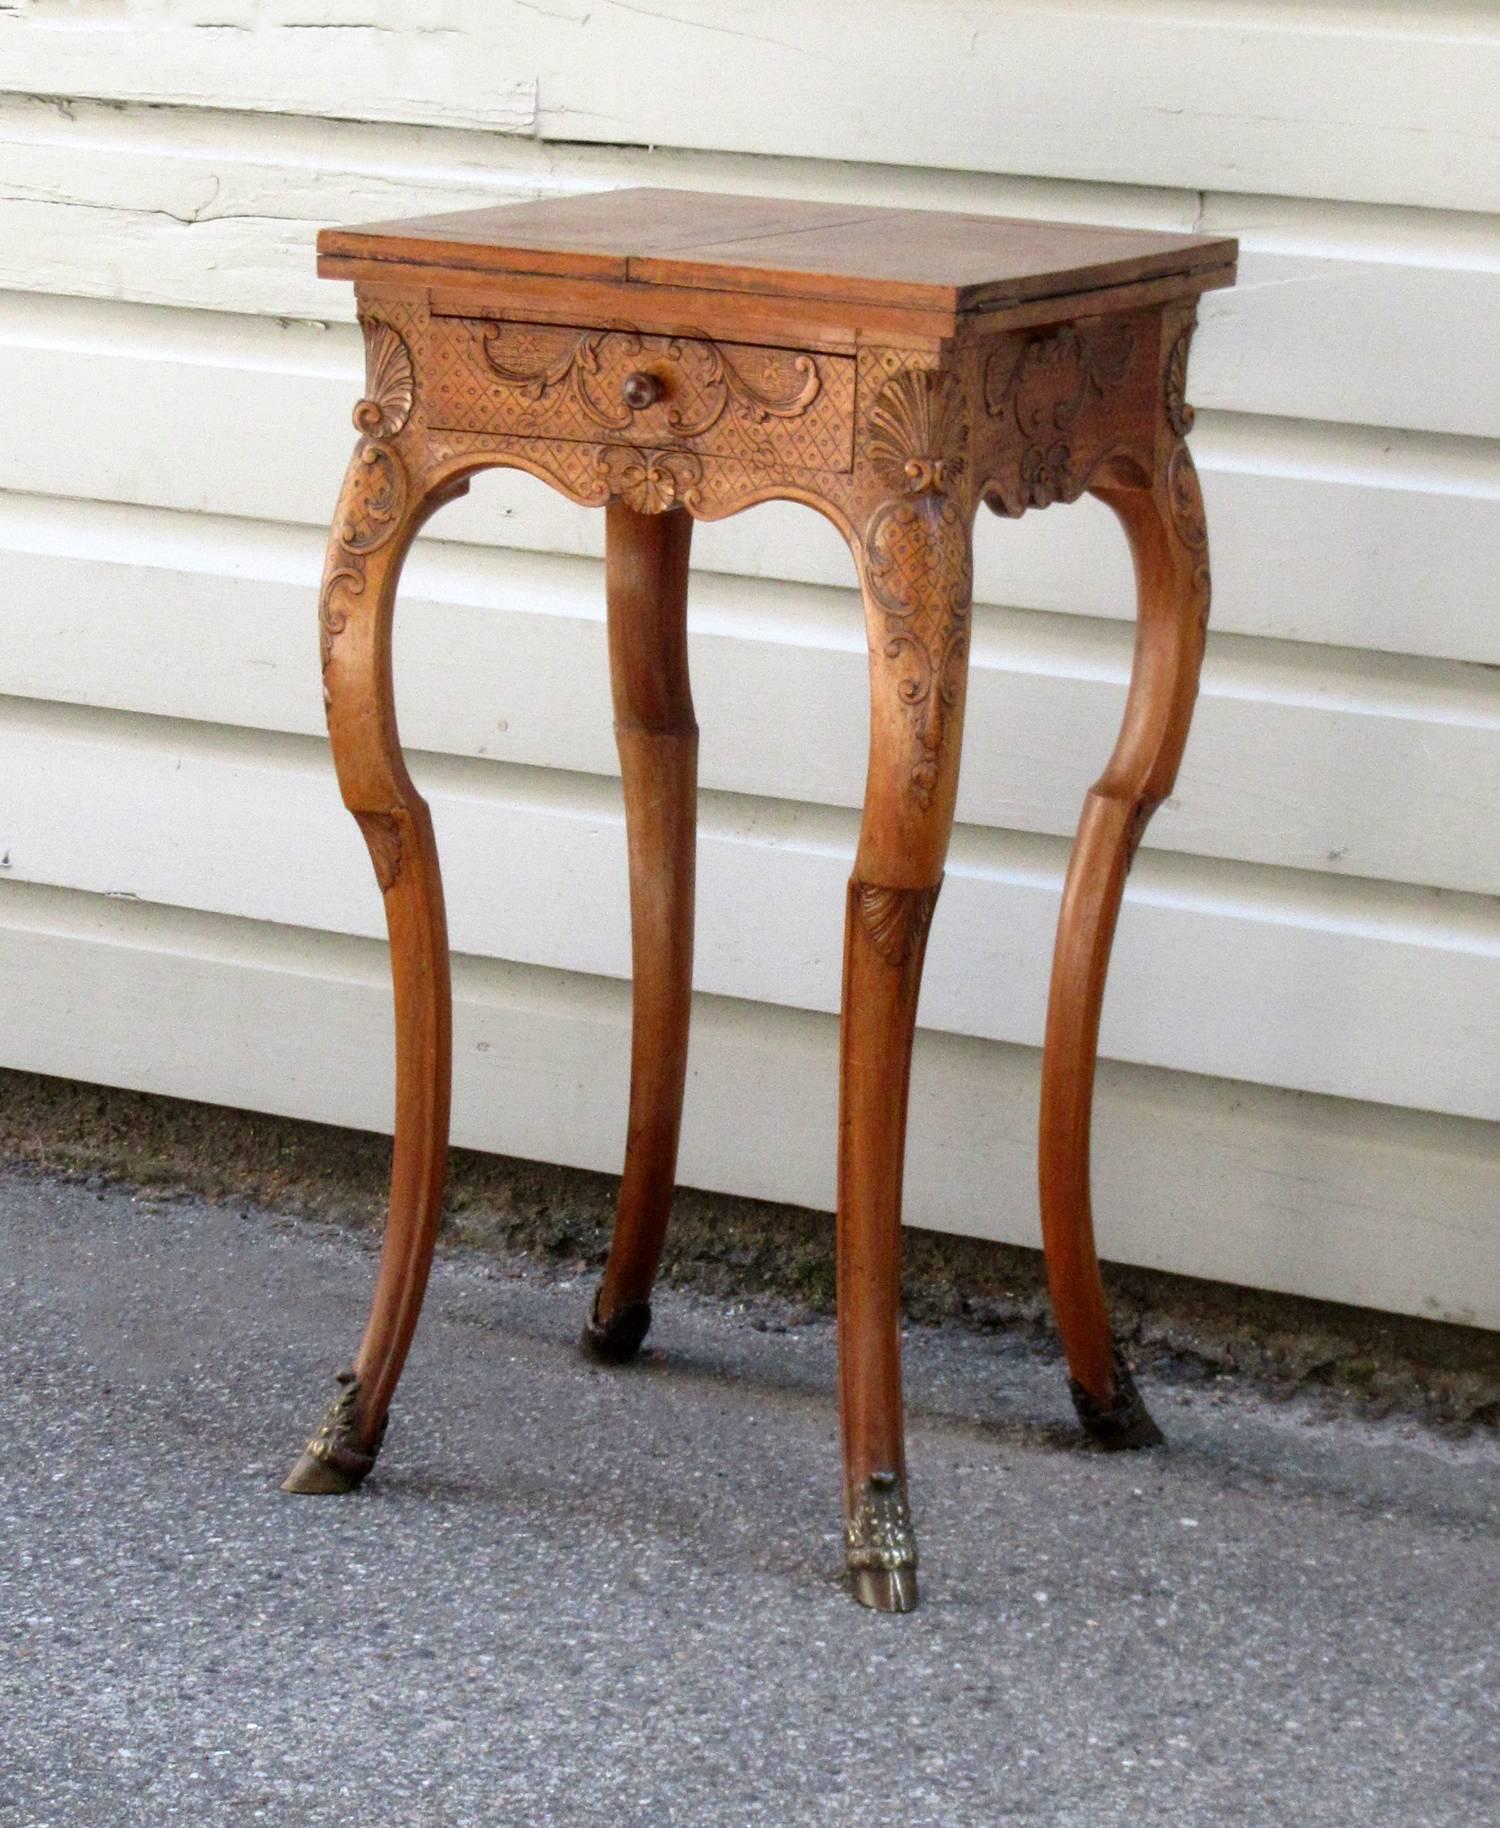 A mid-19th century French Rococo walnut game or work table, circa 1850, featuring one drawer, fine shell motif carvings and horse legs ending in bronze hoof feet. The top when opened up measures 30